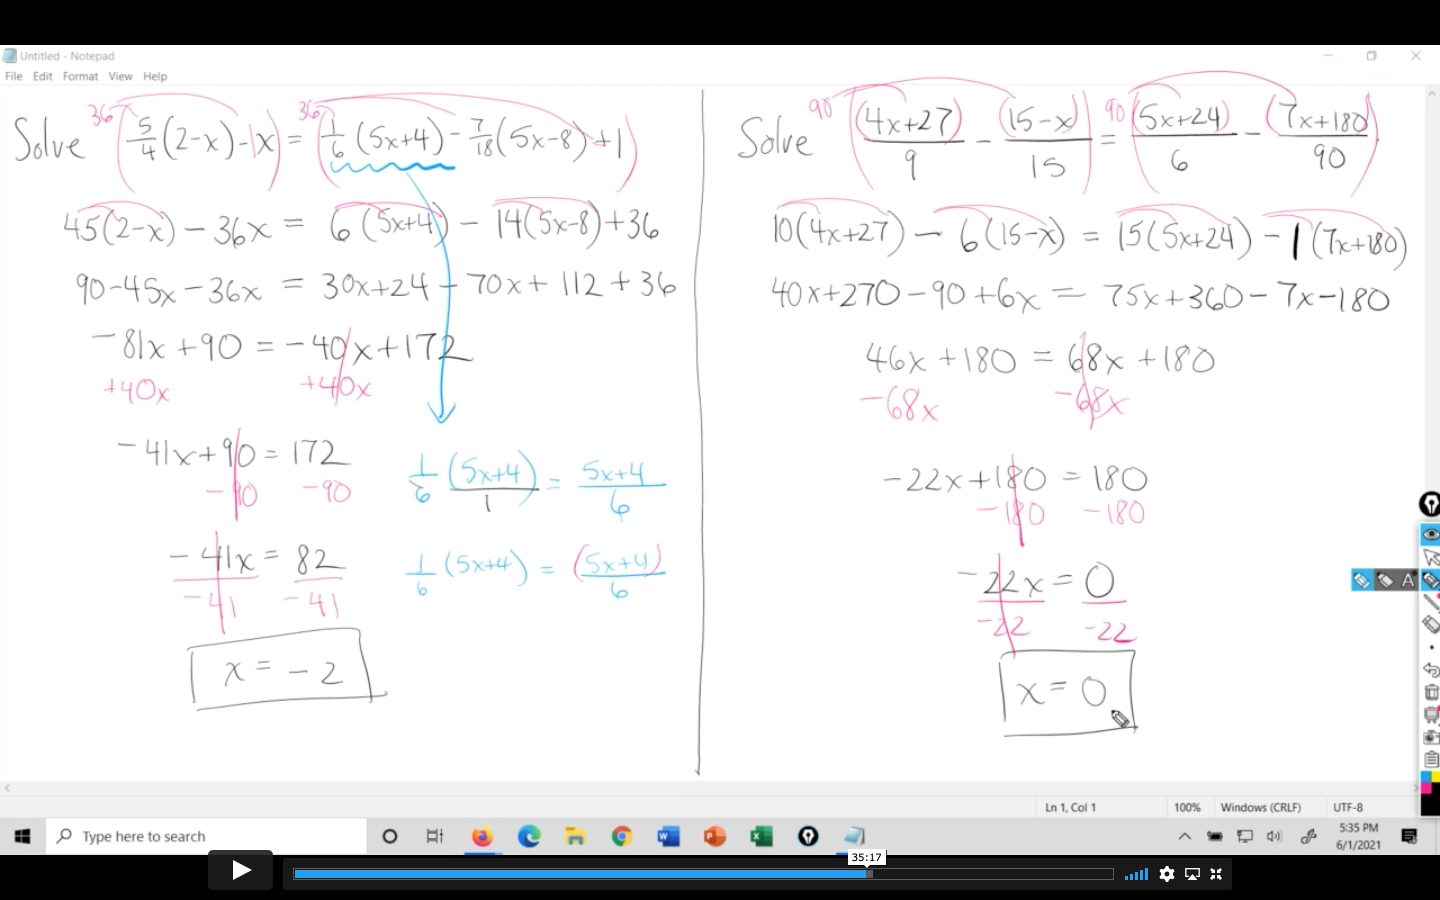 Intro to linear equation standard form, Algebra (video)